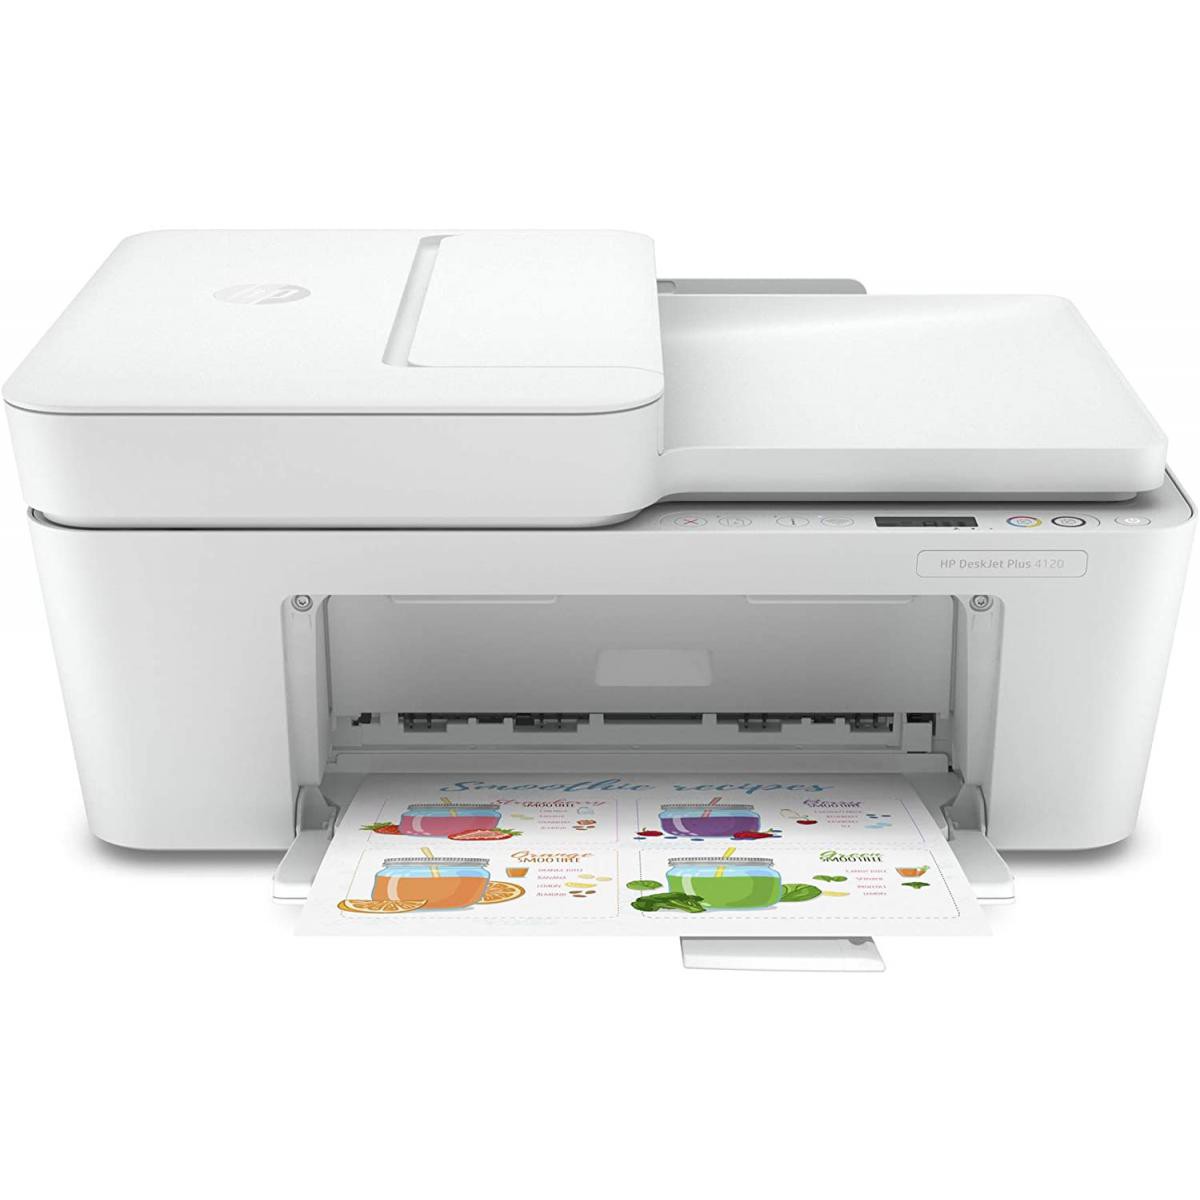 Hp - HP HP DeskJet Plus 4120 All-in-One HP DeskJet Plus 4120 All-in-One Printer - Imprimantes d'étiquettes